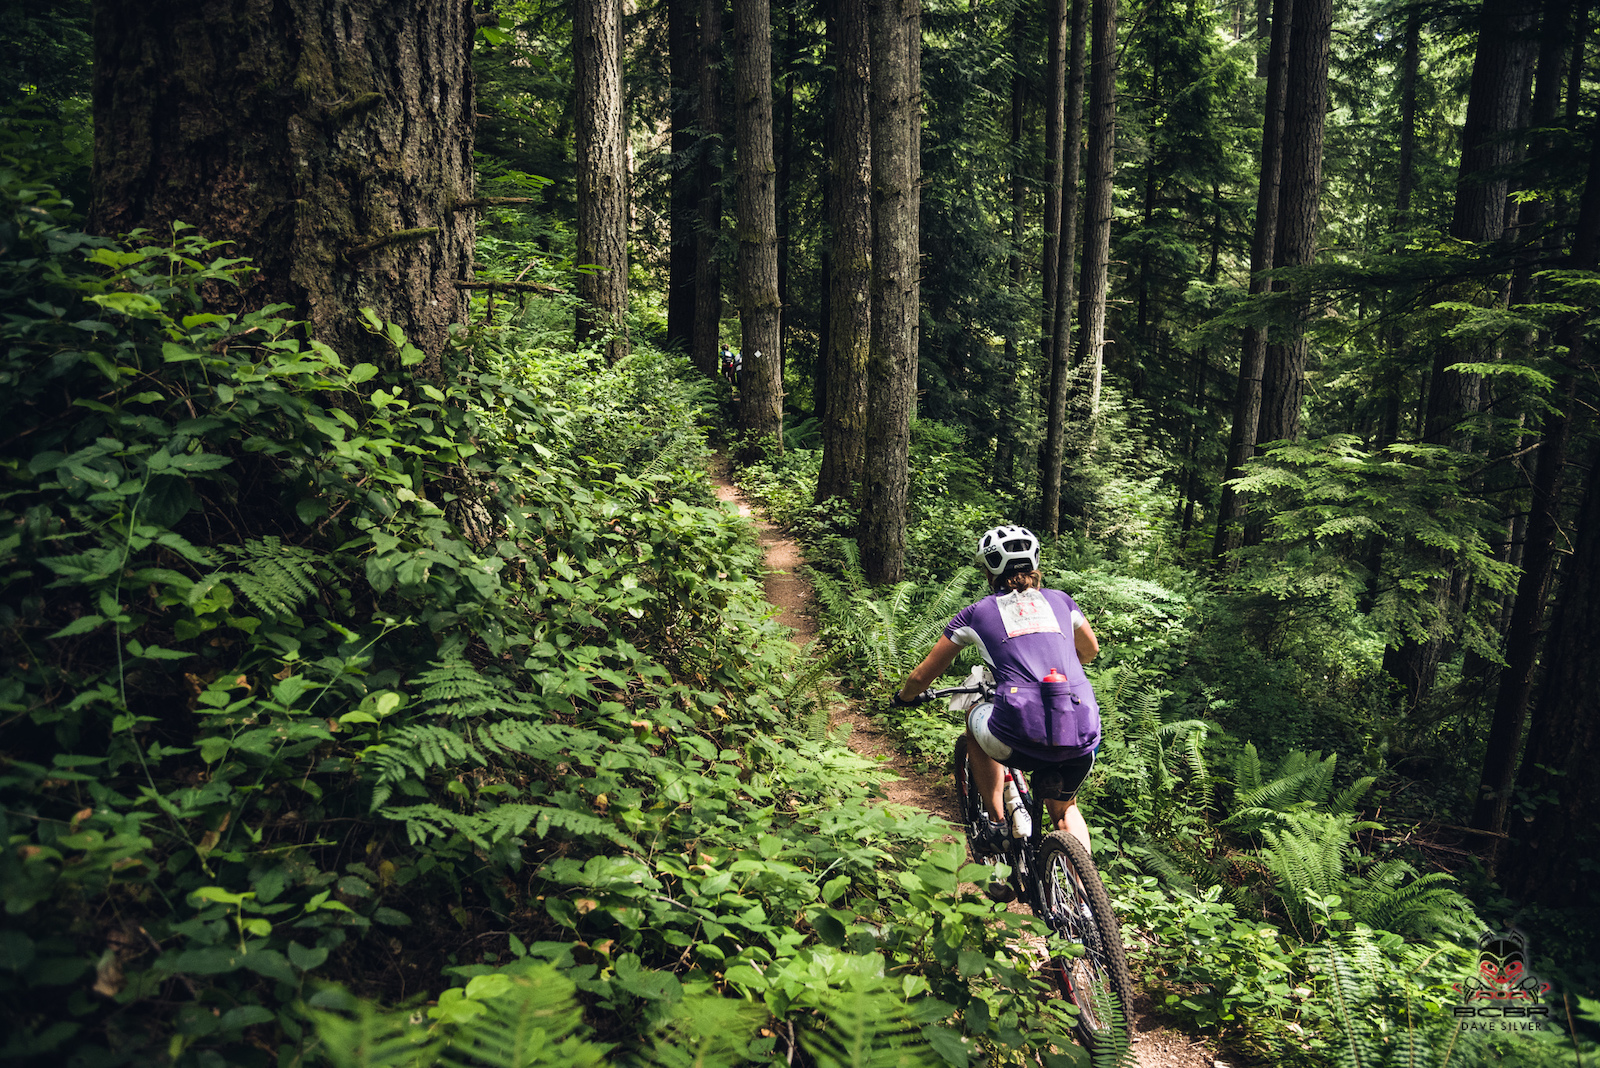 Looking for singletrack? The trails around Sechelt have it in abundance. Come her and get tickled by the foliage.